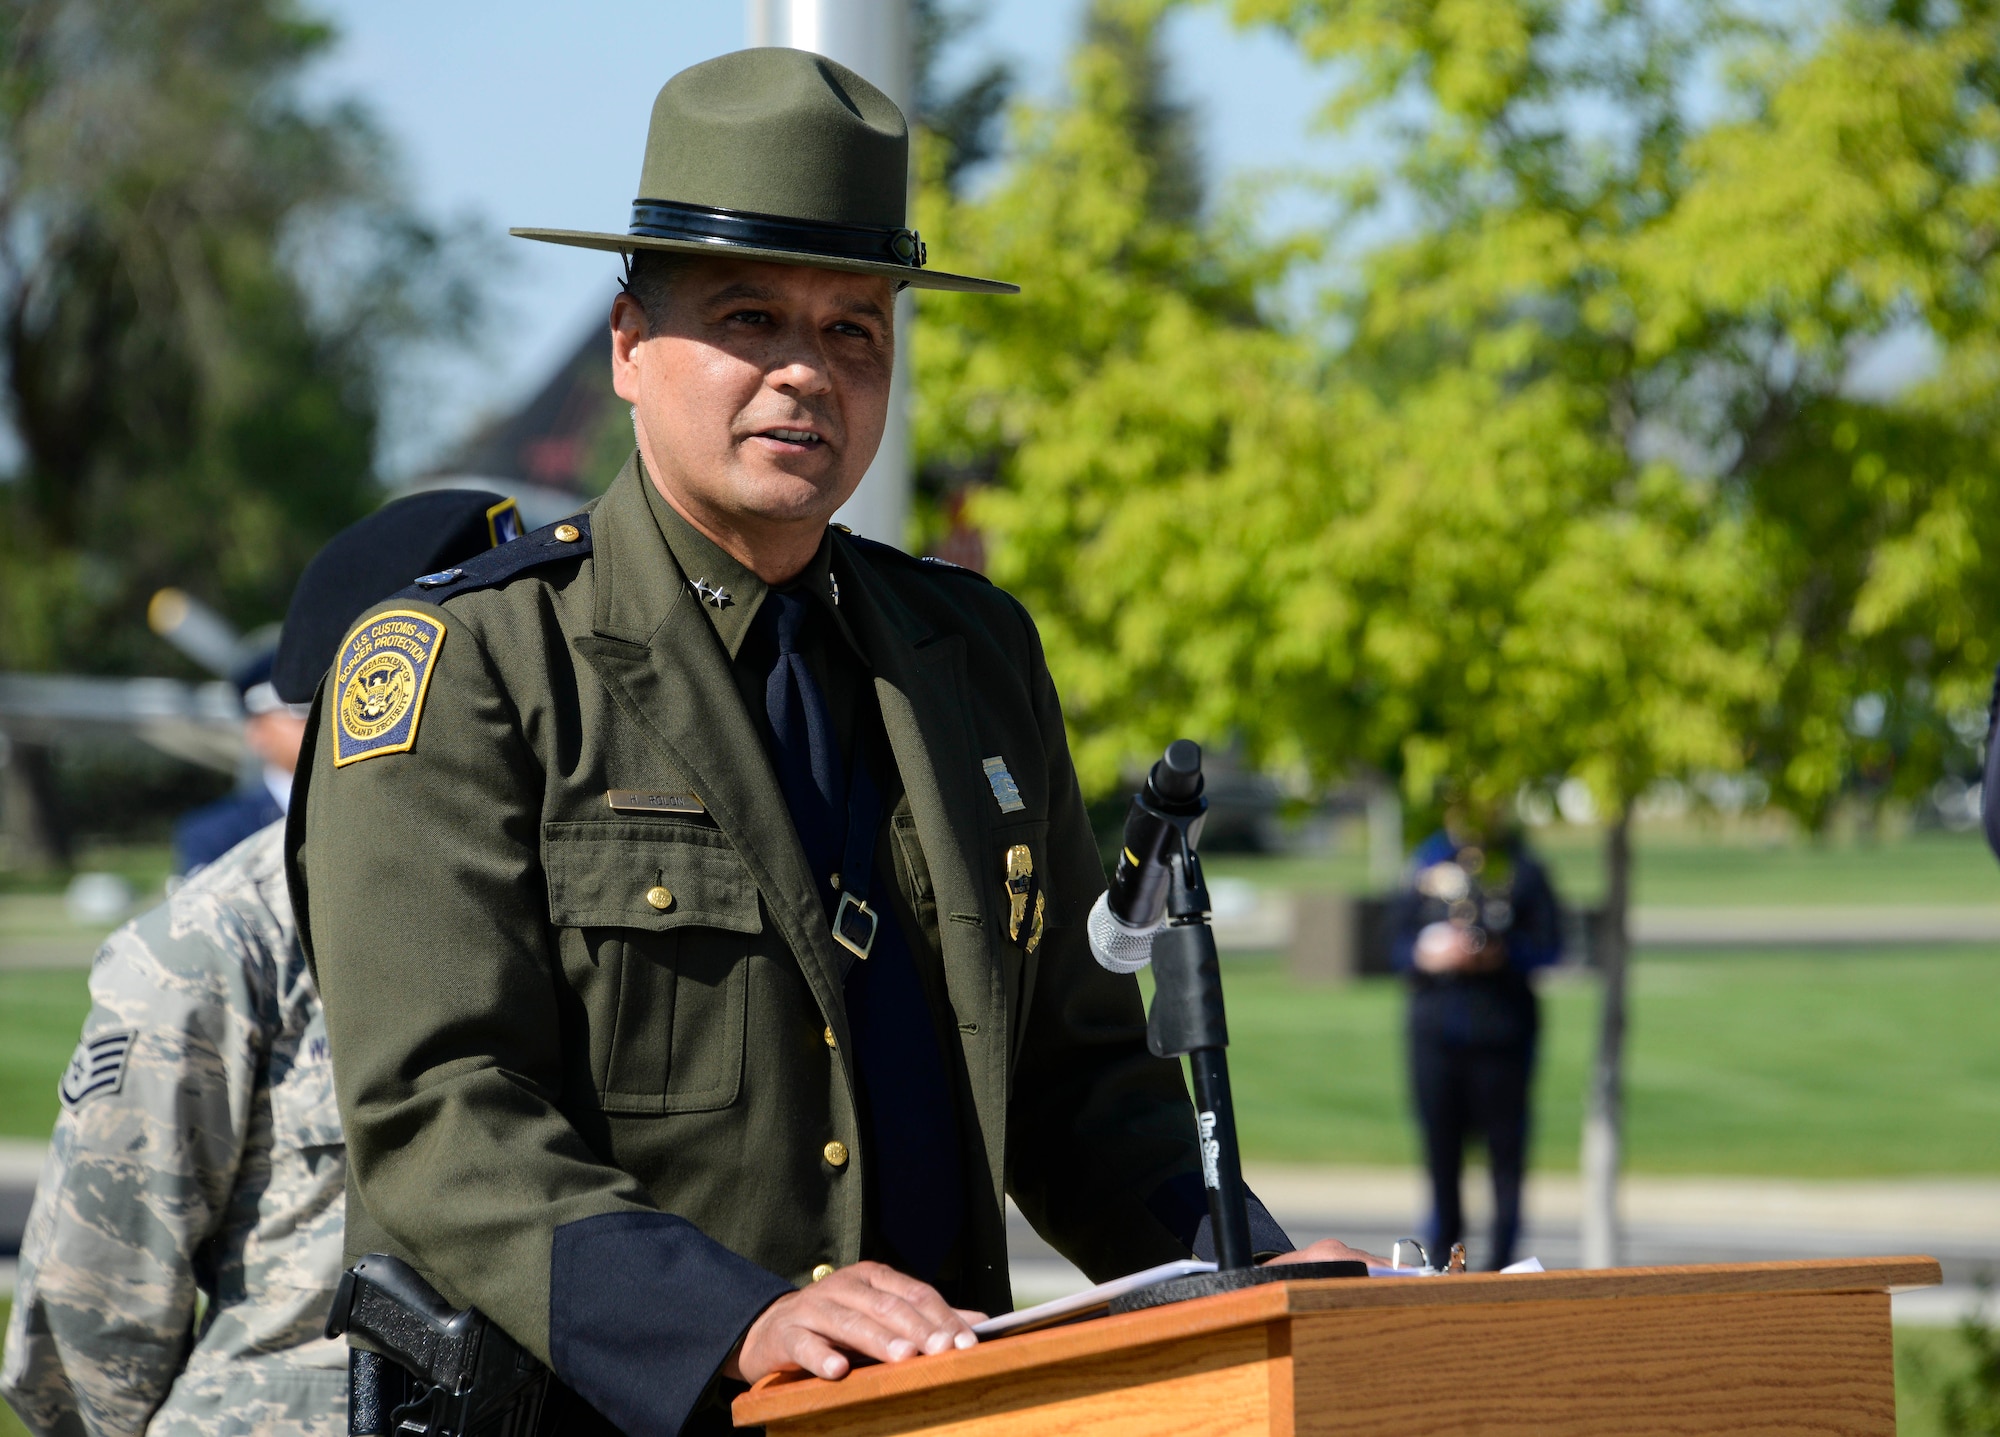 Henry Rolon, Spokane Police Department Sector Chief patrol agent, speaks about the importance of Police Week during a National Police Week Memorial Retreat Ceremony at Fairchild Air Force Base, Washington, May 16, 2018.  The retreat is a ceremony during National Police Week to honor fallen law enforcement professionals.